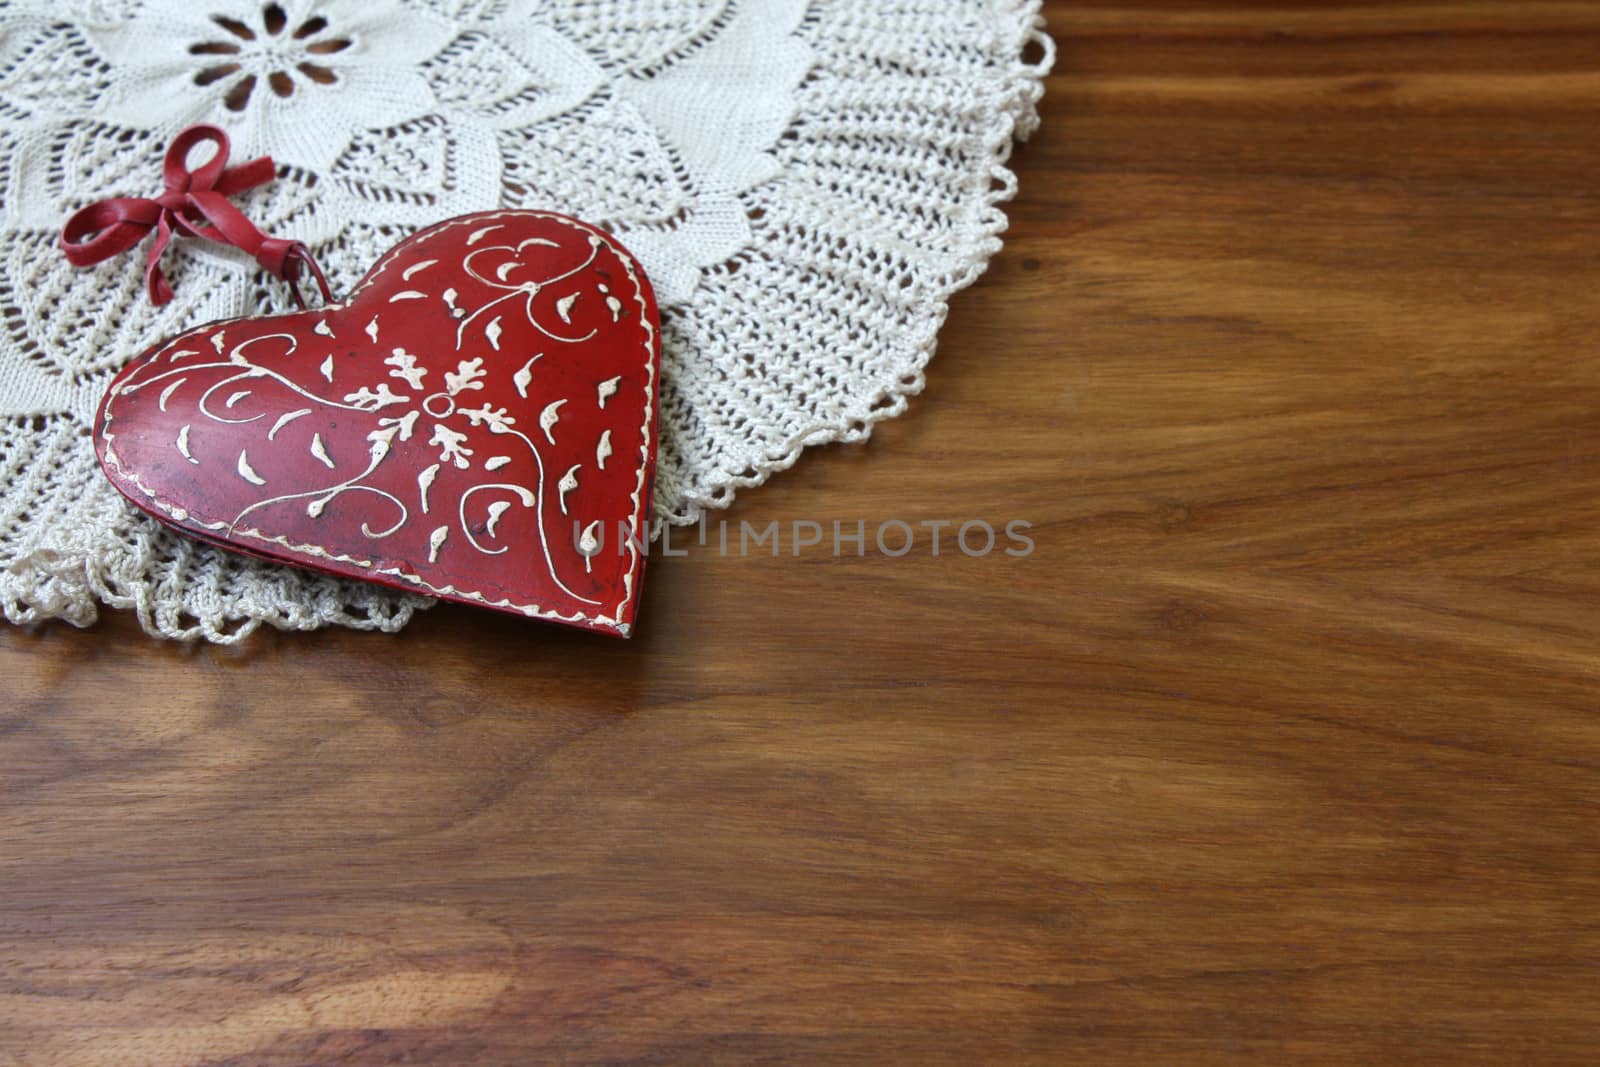 Two decorative items on a wooden table